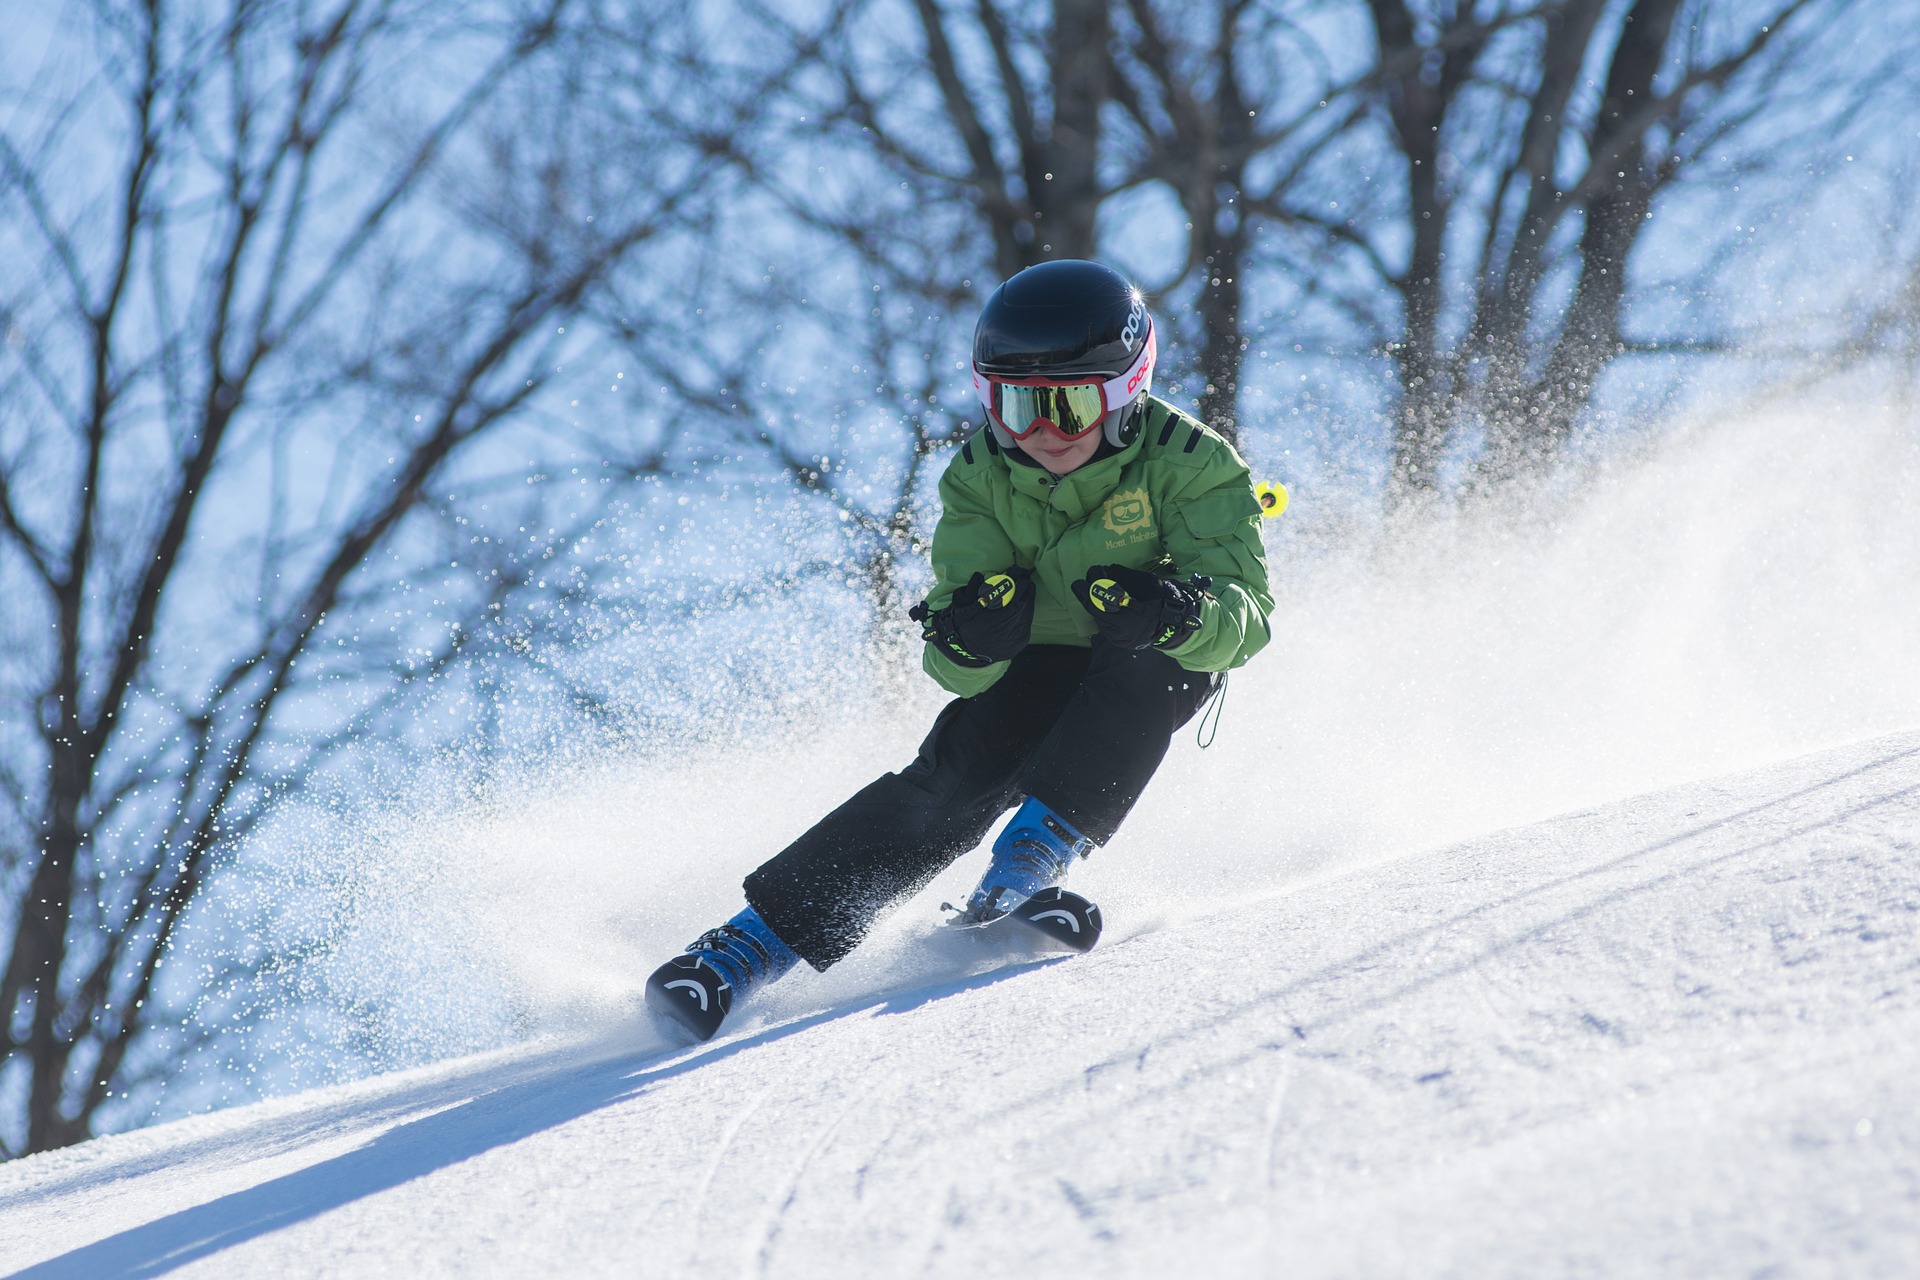 Mountain Creek is fun option for the whole family, with skiing, tubing, and biking activities. 